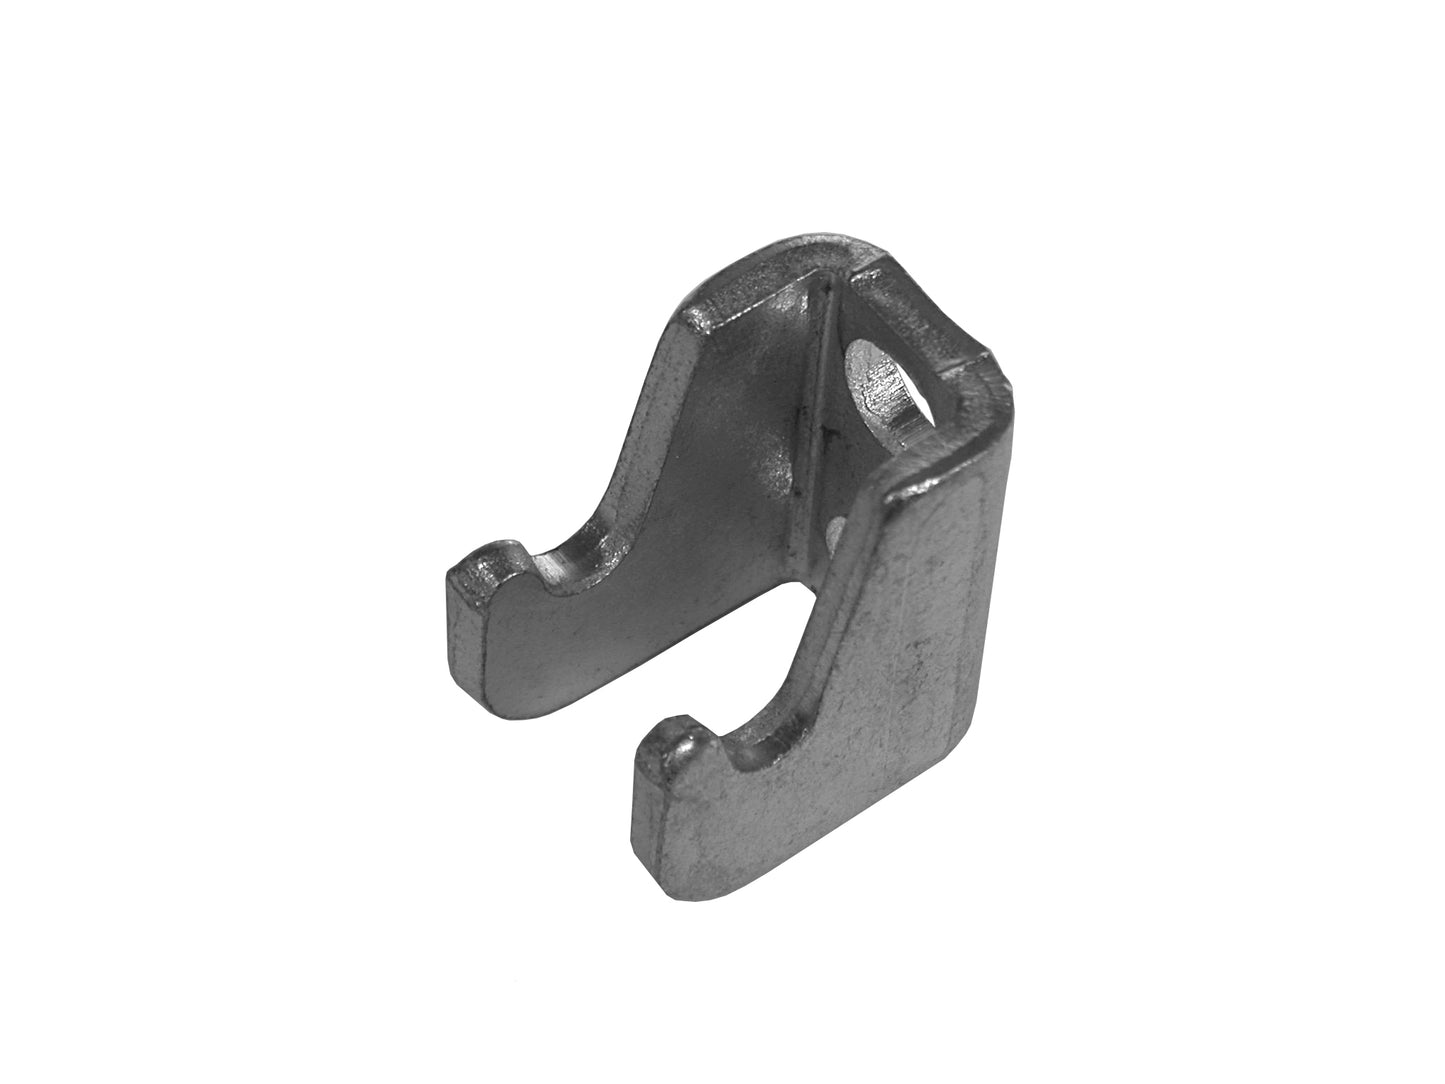 Latch Plate for K-10 Clamp, Destaco™ - KC6270